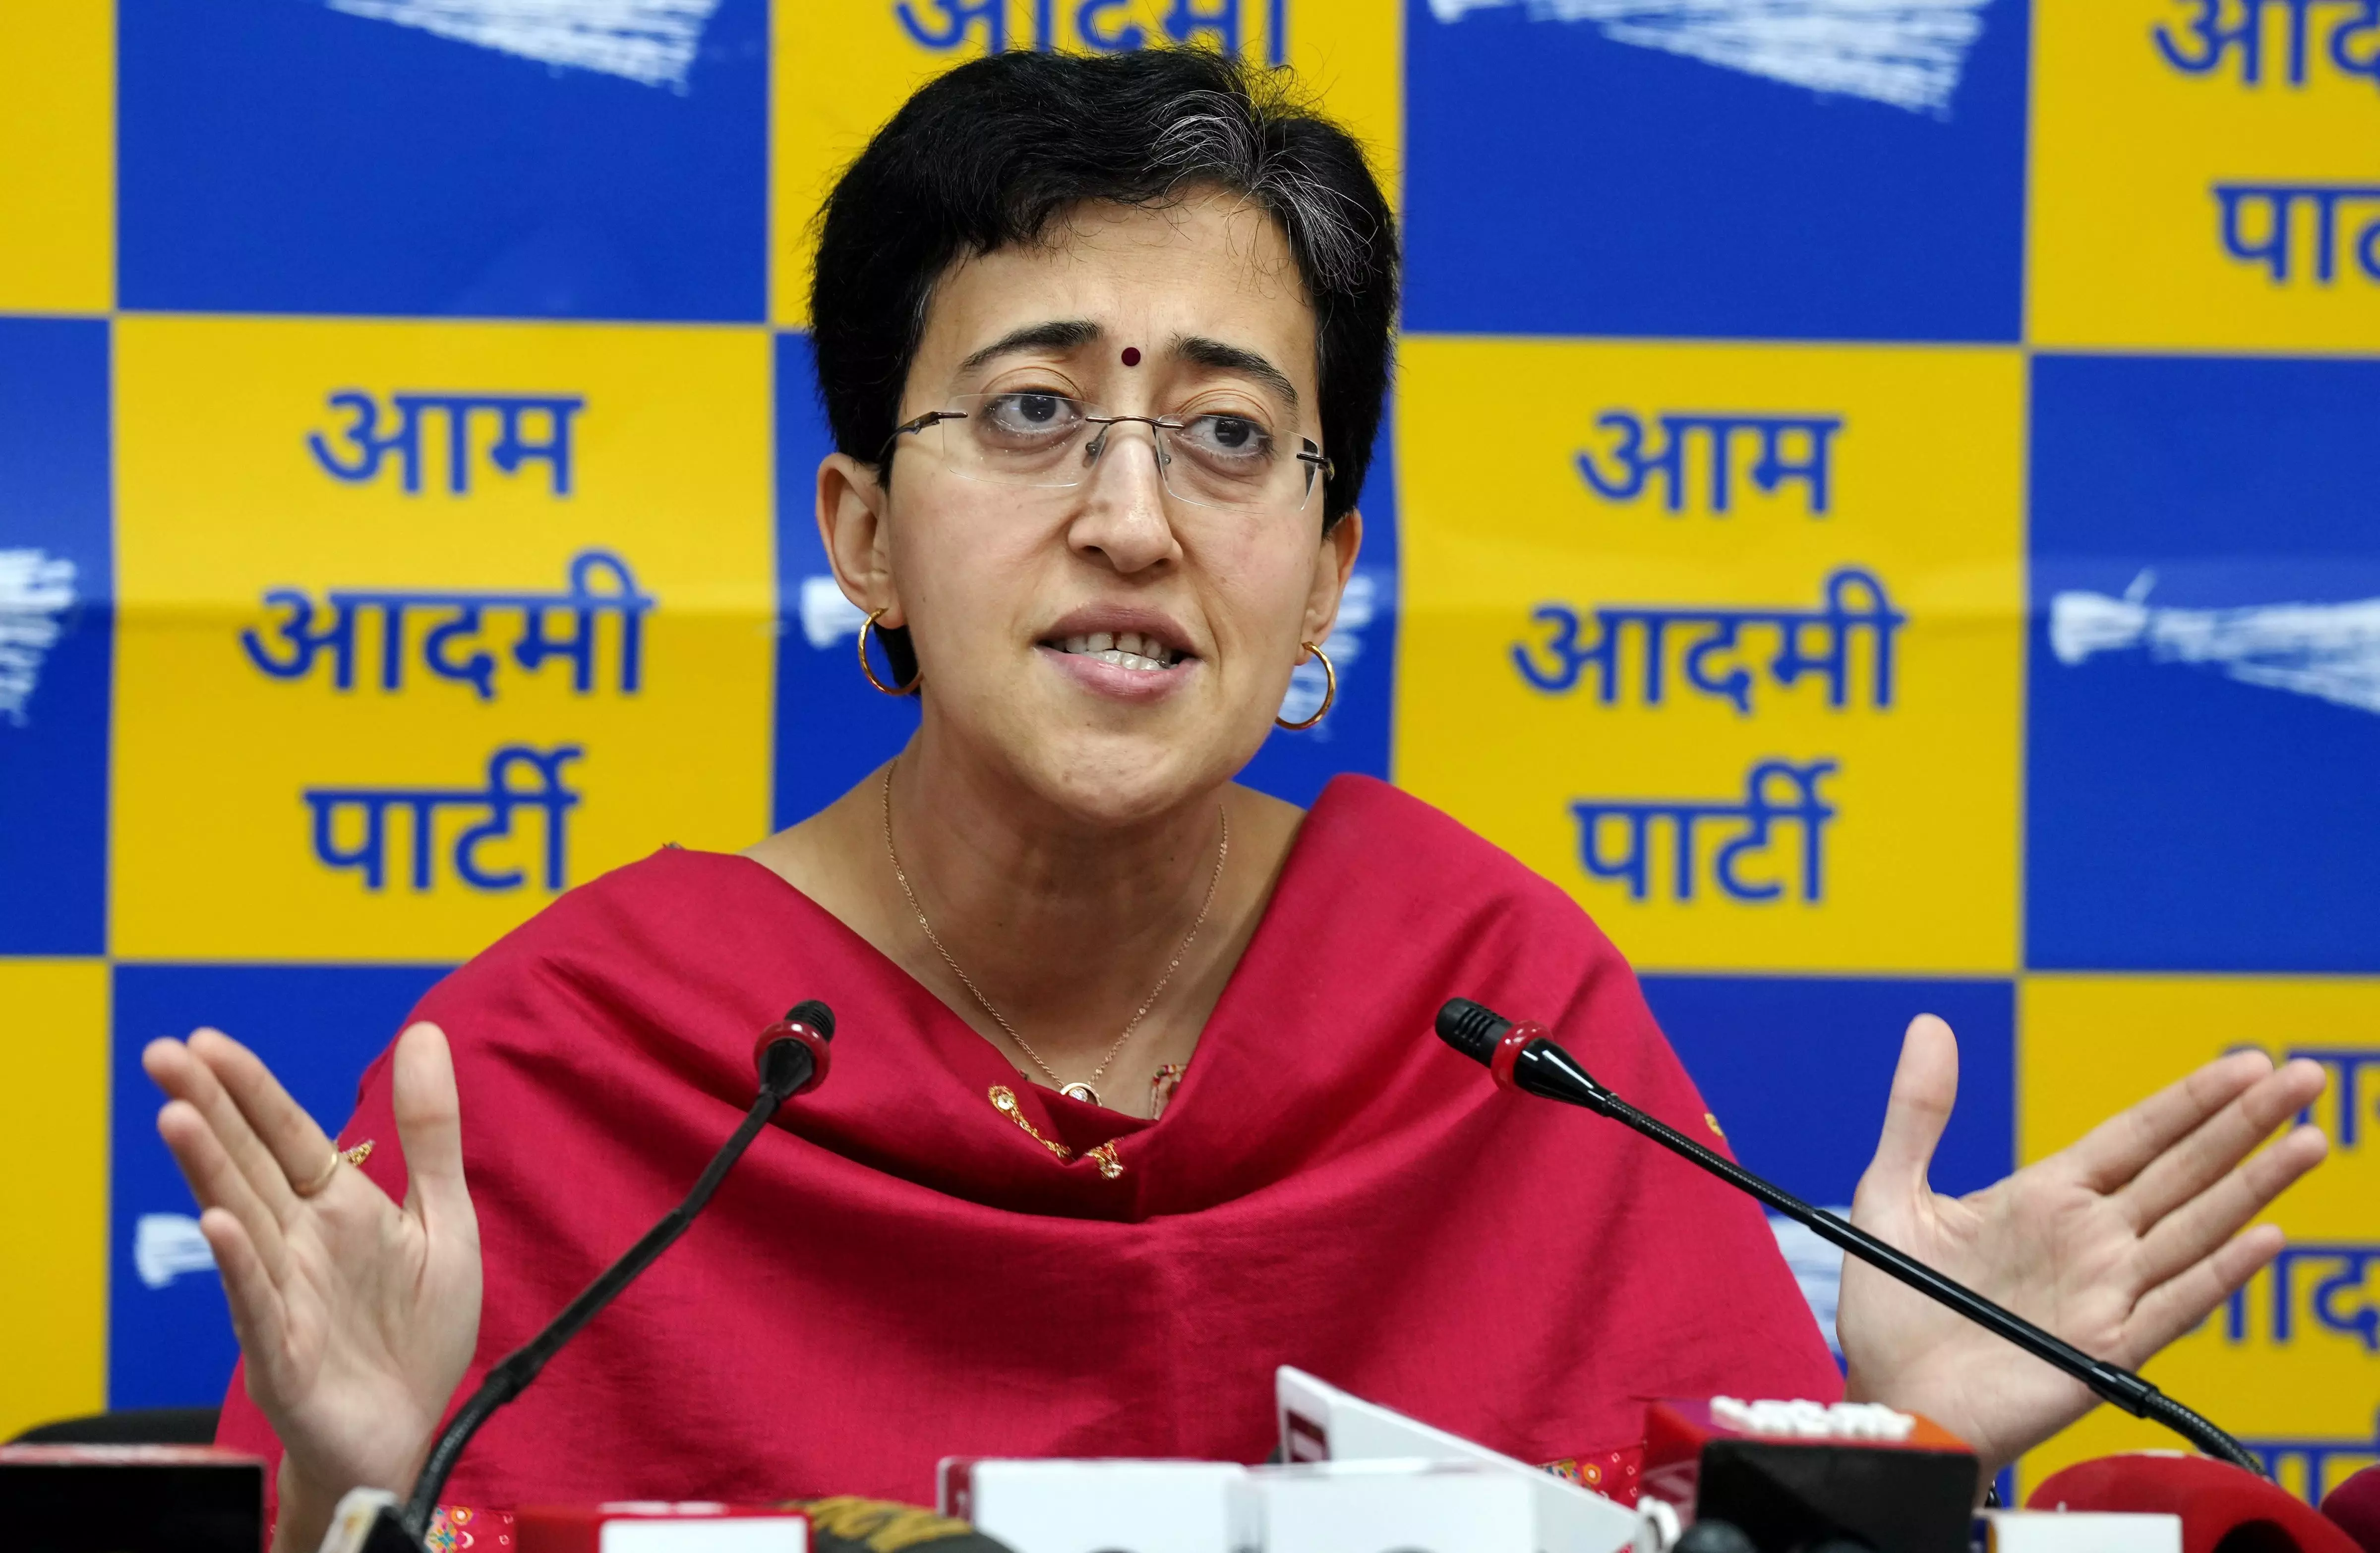 Shah admitted in interview that ED aimed to arrest Kejriwal from the start: AAP minister Atishi